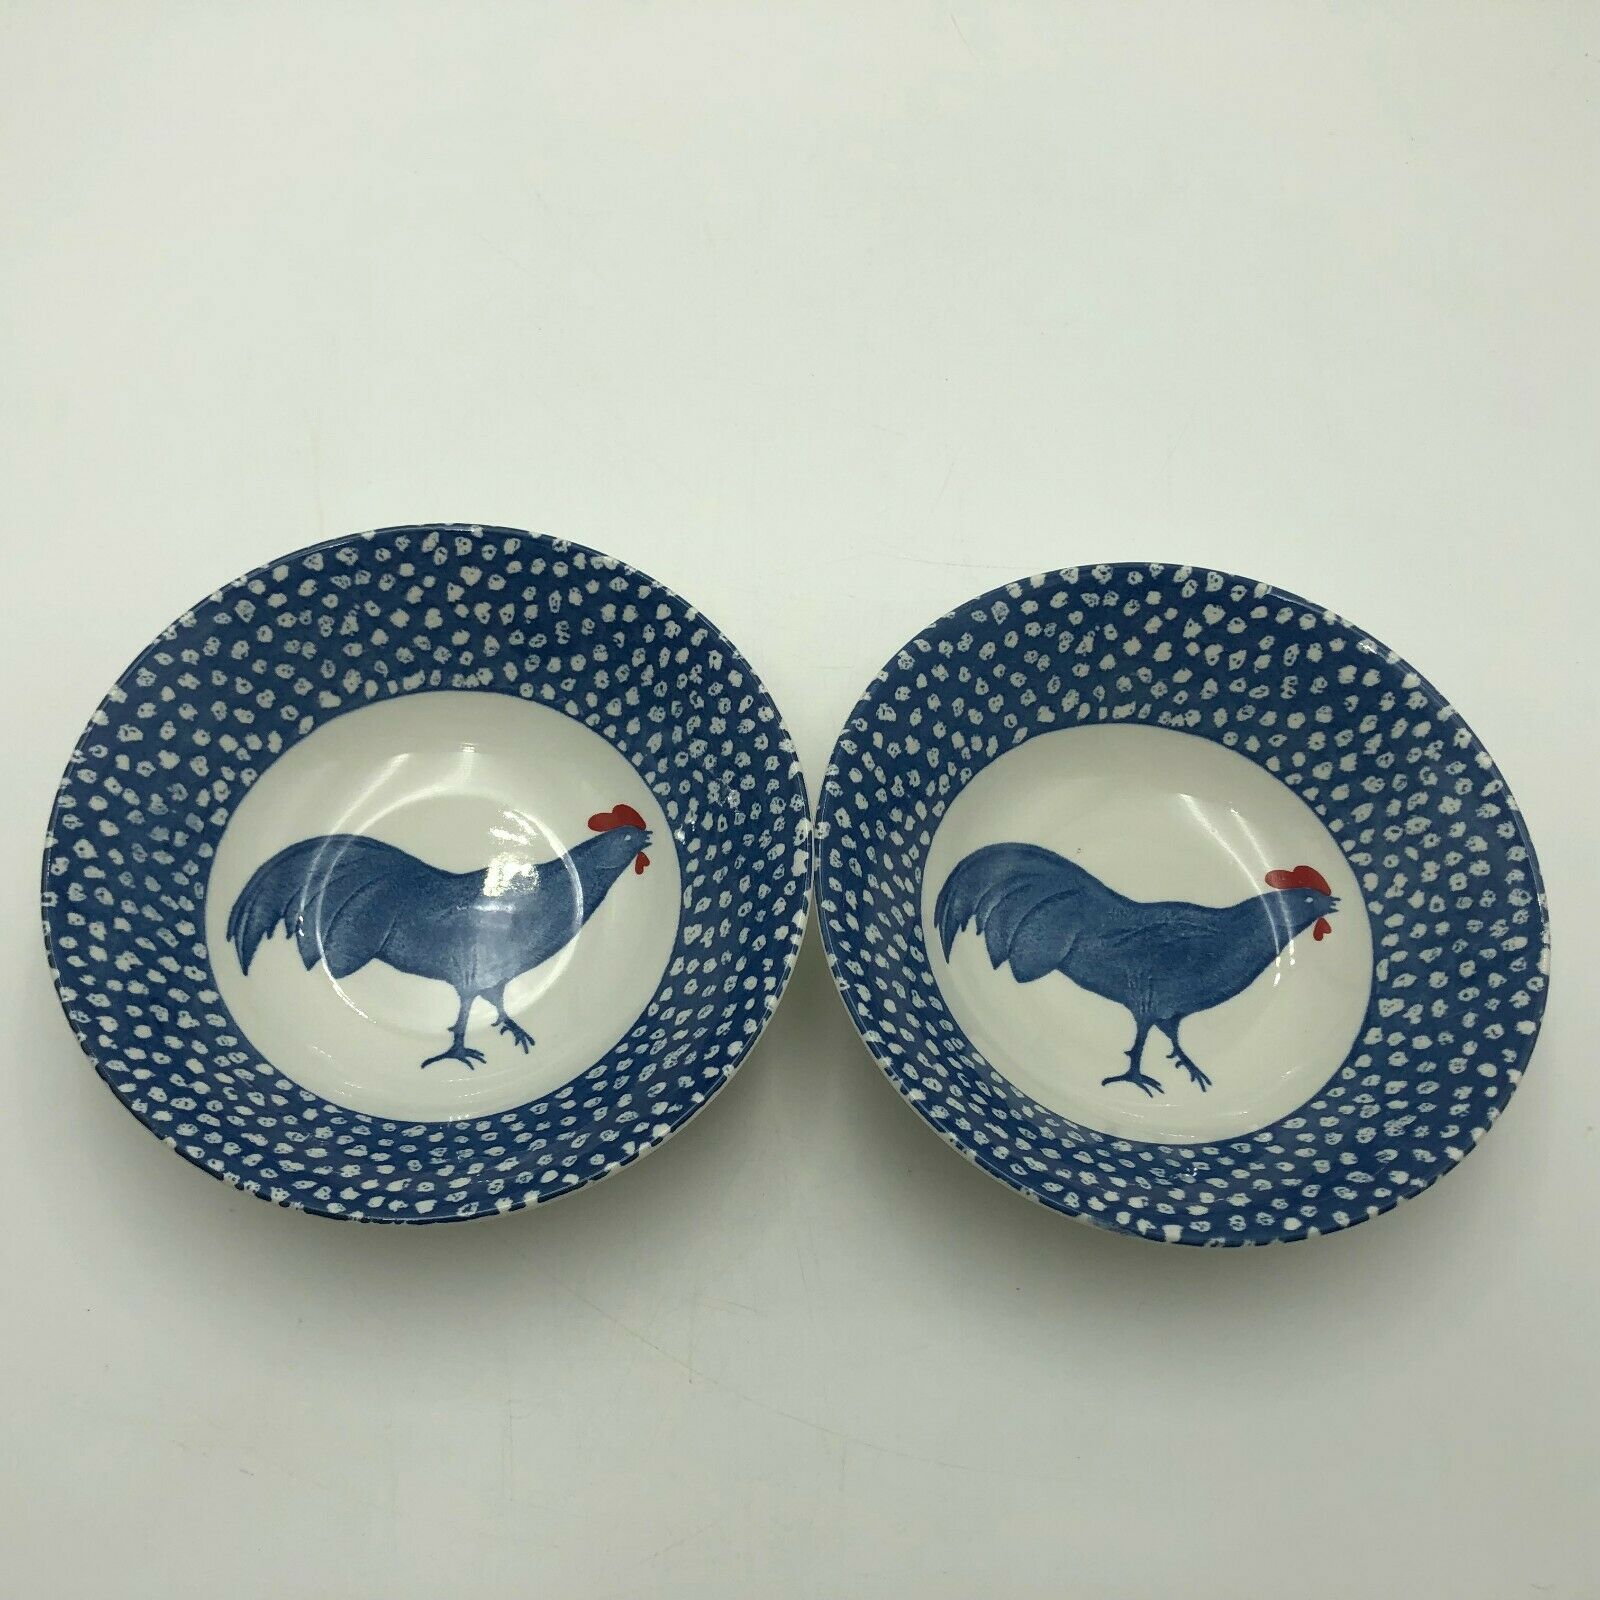 Set 2 Soup Cereal Bowls England Chanticleer Burleigh Burgess Leigh Blue Rooster